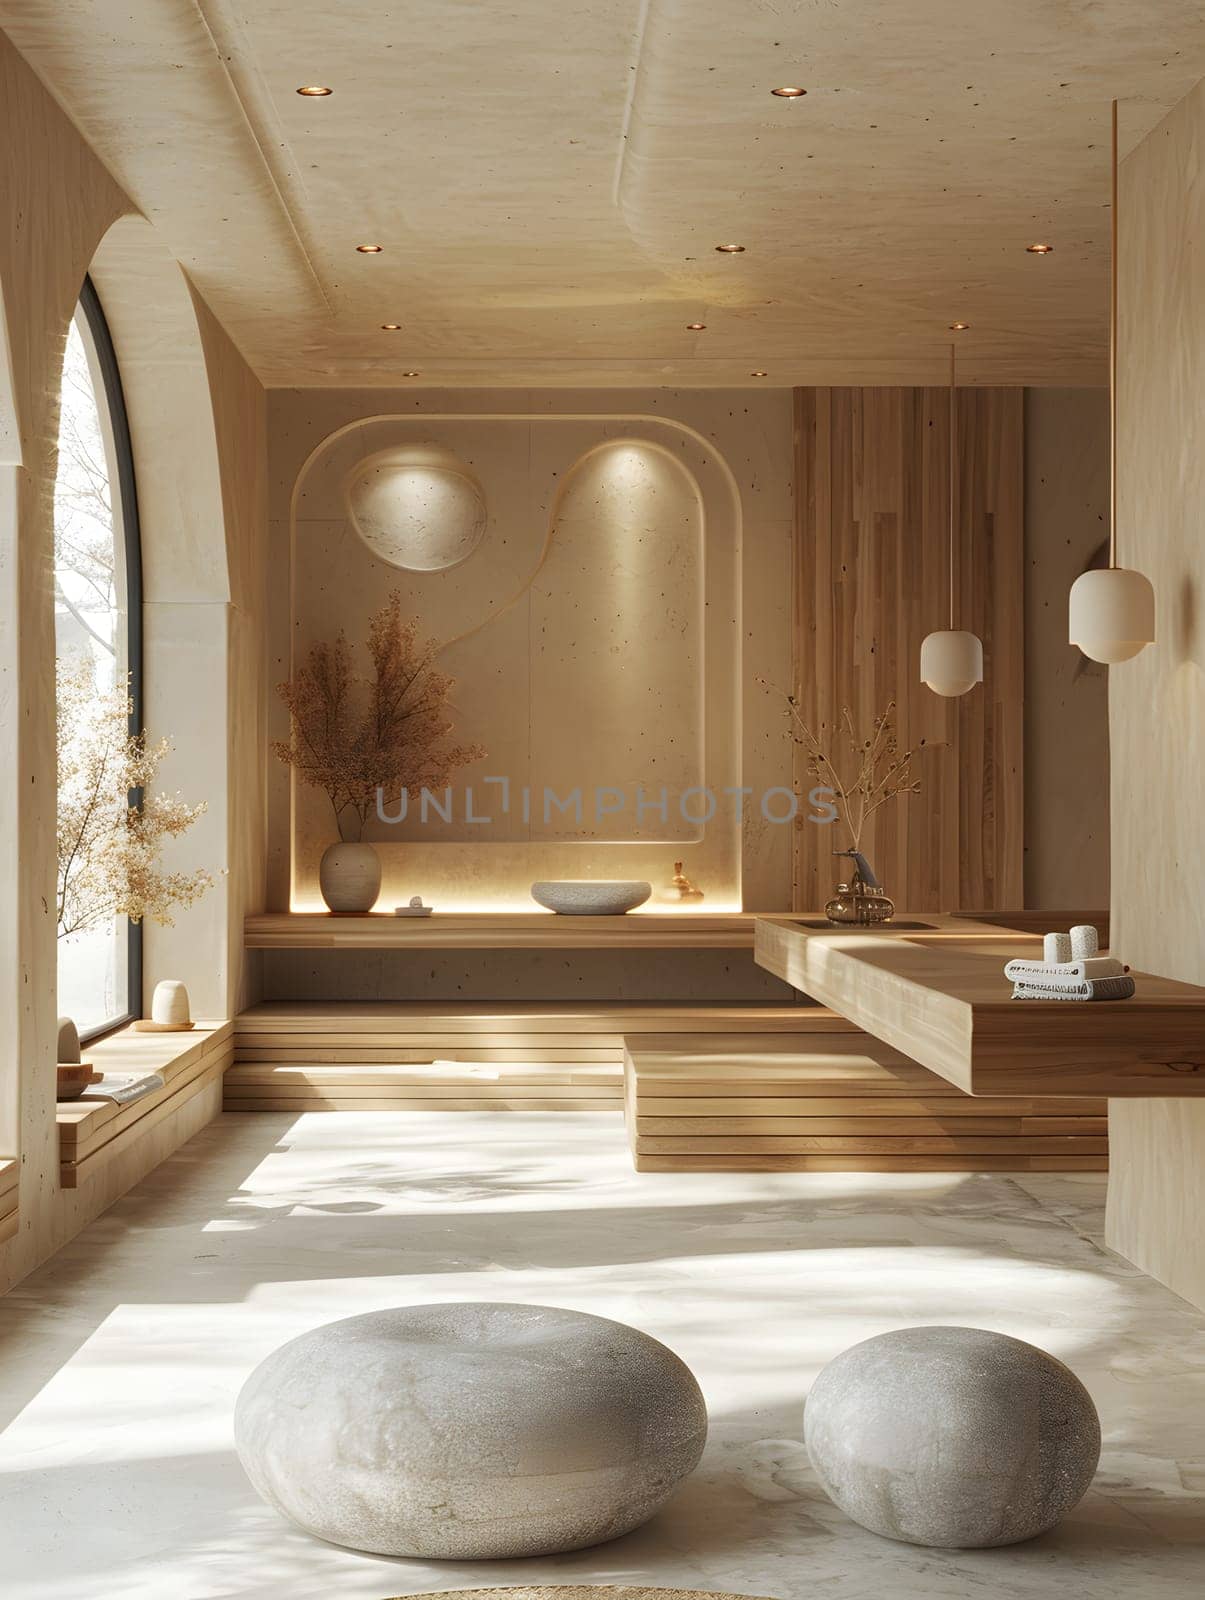 A building with a bathroom featuring a bathtub, sink, and two rocks on the hardwood flooring. The house has a living room with a wooden ceiling and arch